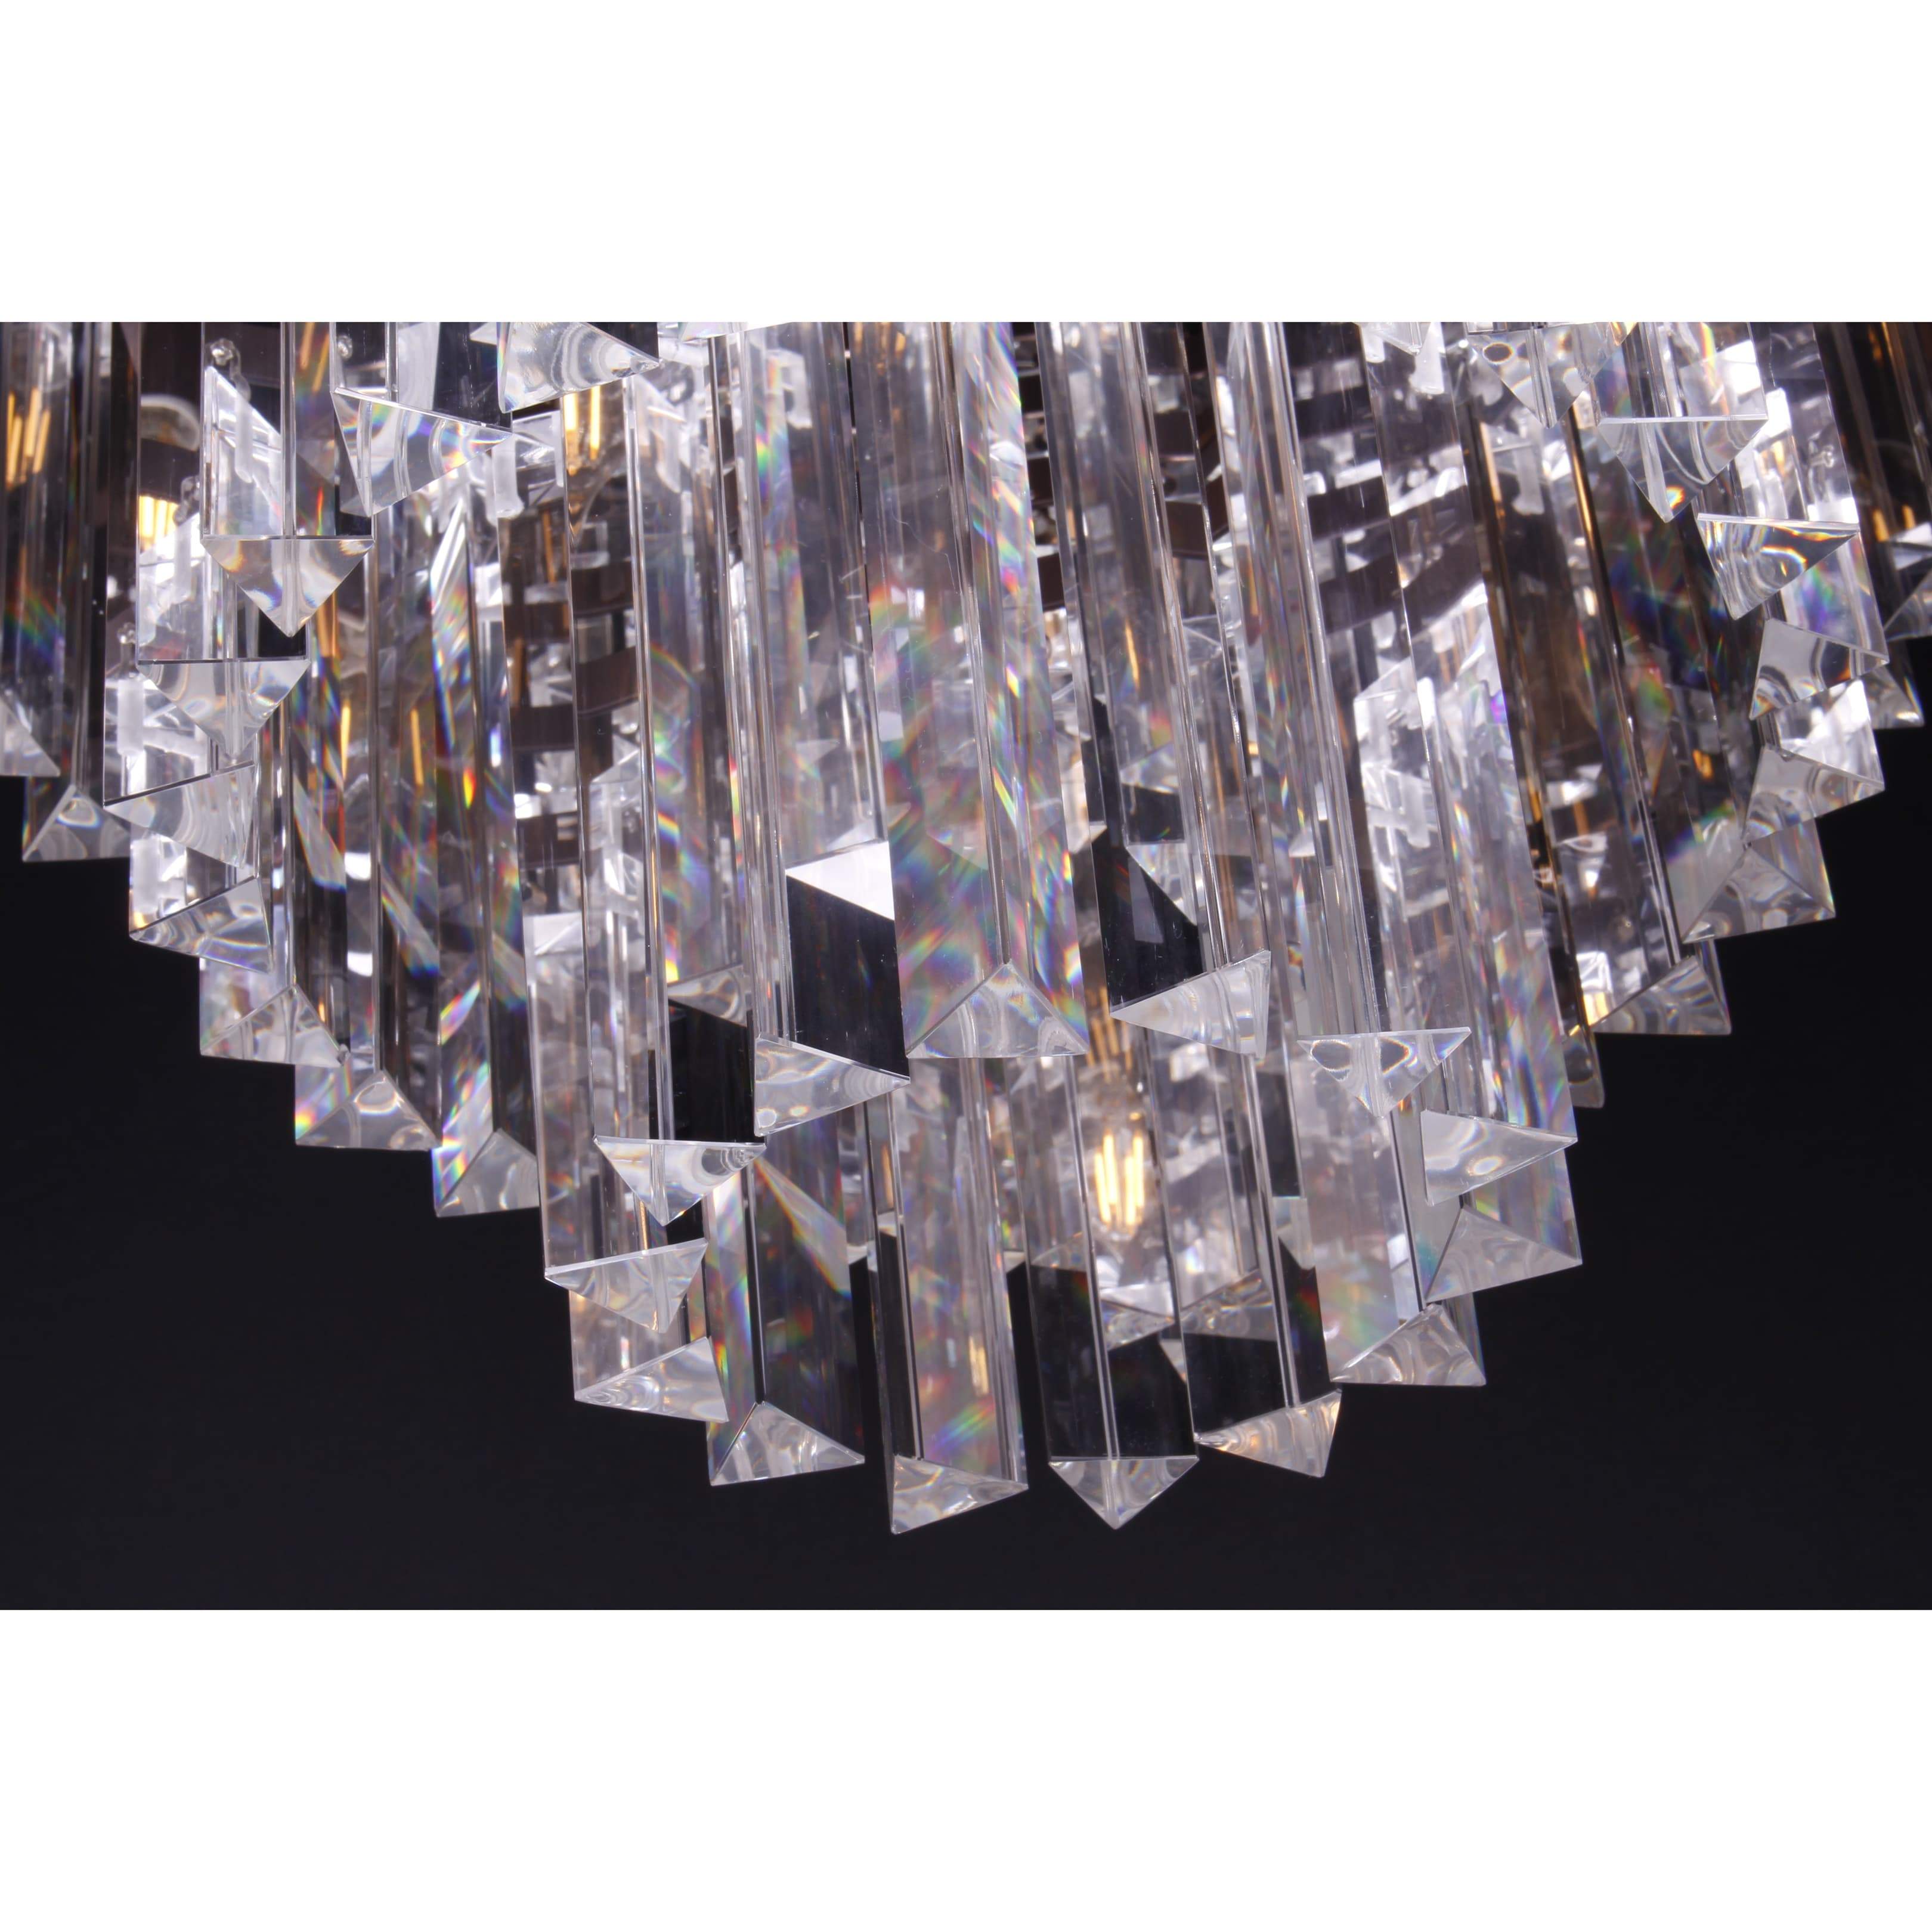 Flushmount Apex Odeon Tiered Round Crystal Fringe Chandelier Collection - Italian Concept - 